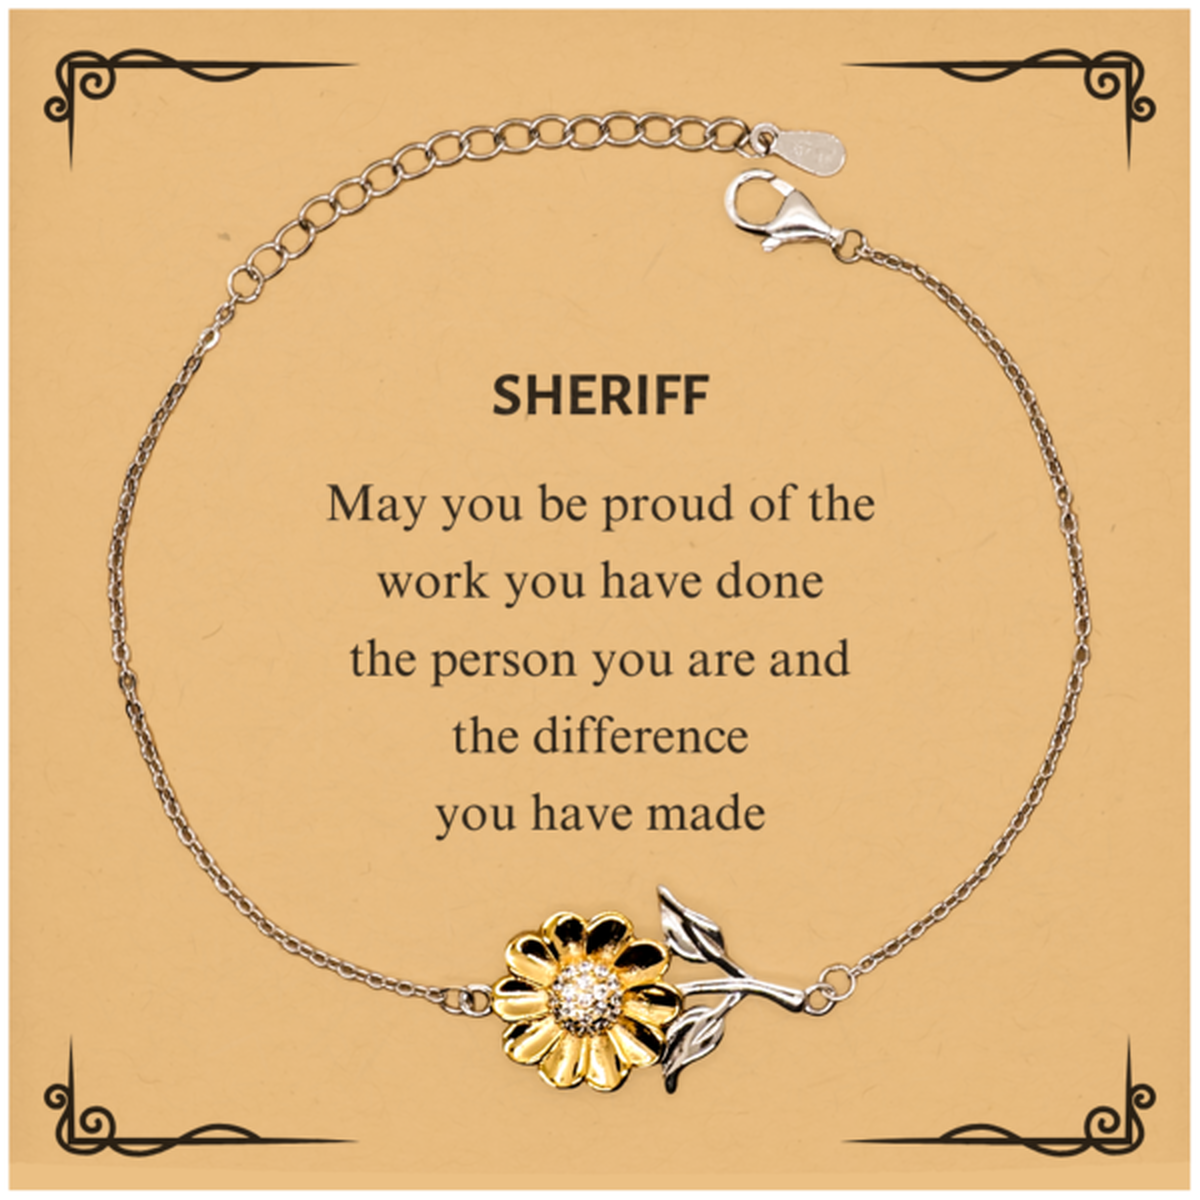 Sheriff May you be proud of the work you have done, Retirement Sheriff Sunflower Bracelet for Colleague Appreciation Gifts Amazing for Sheriff